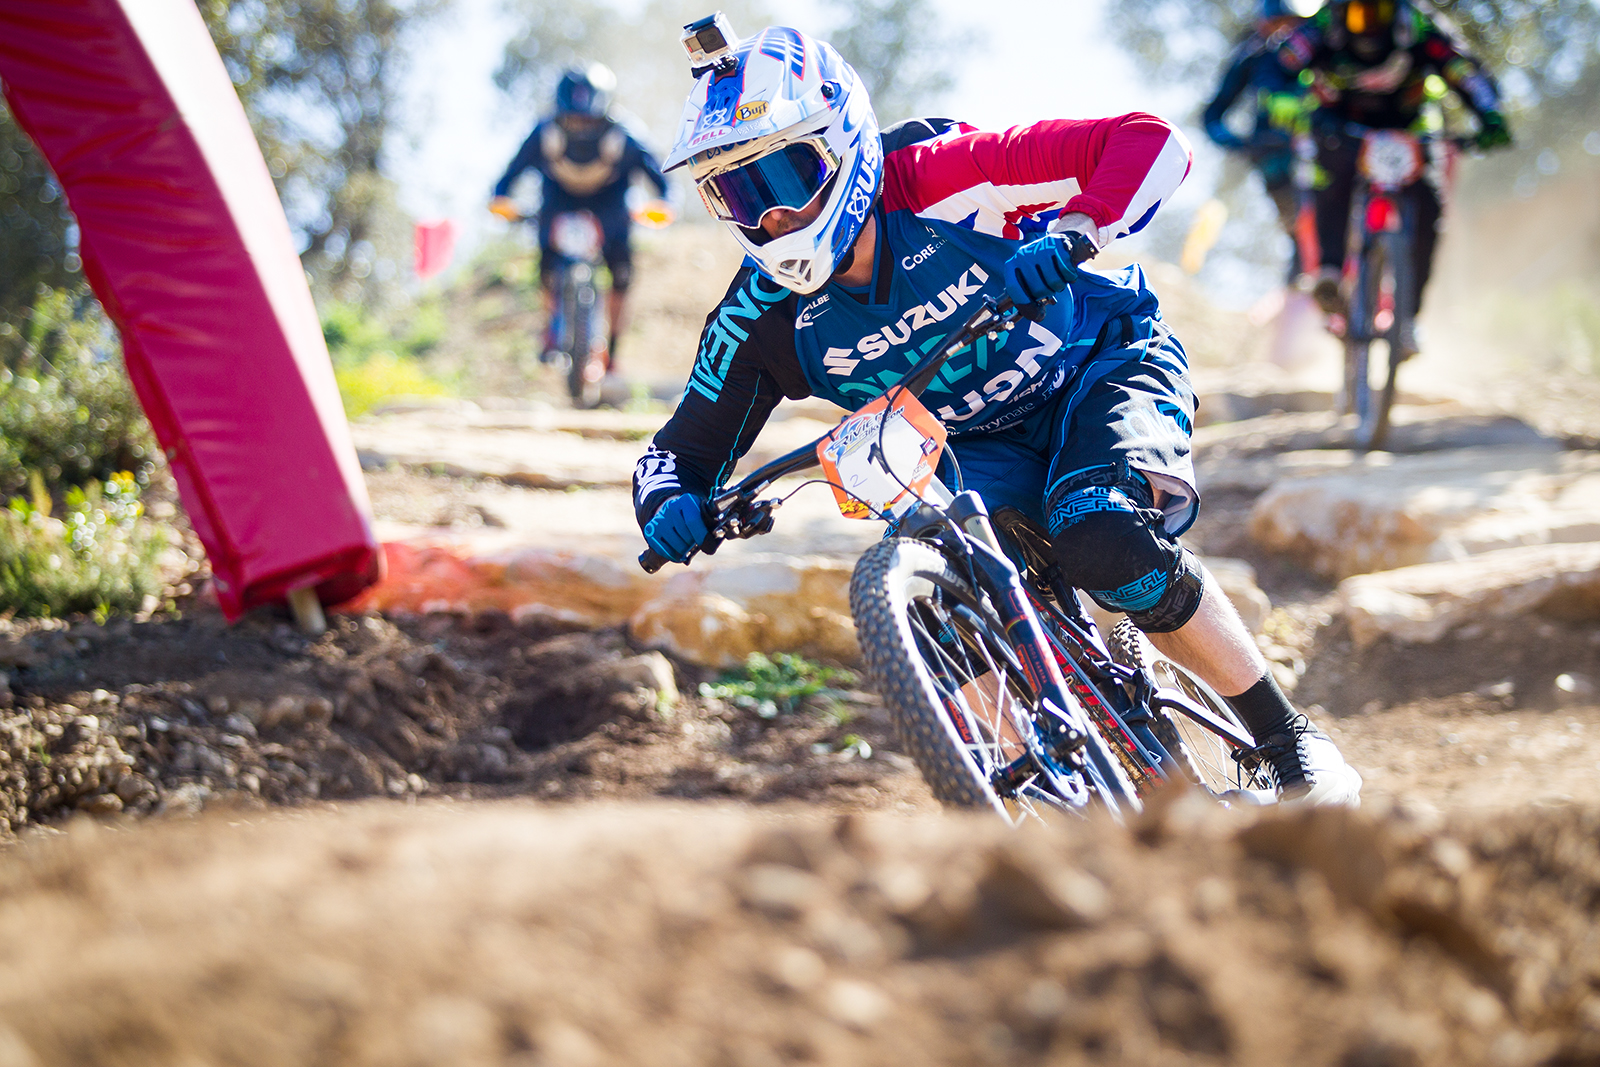 Open practice and finals action during round 1 of the 4X Pro Tour at Azur Bike Park, Rocqbrune, , France on April 09 2017. Photo: Charles A Robertson